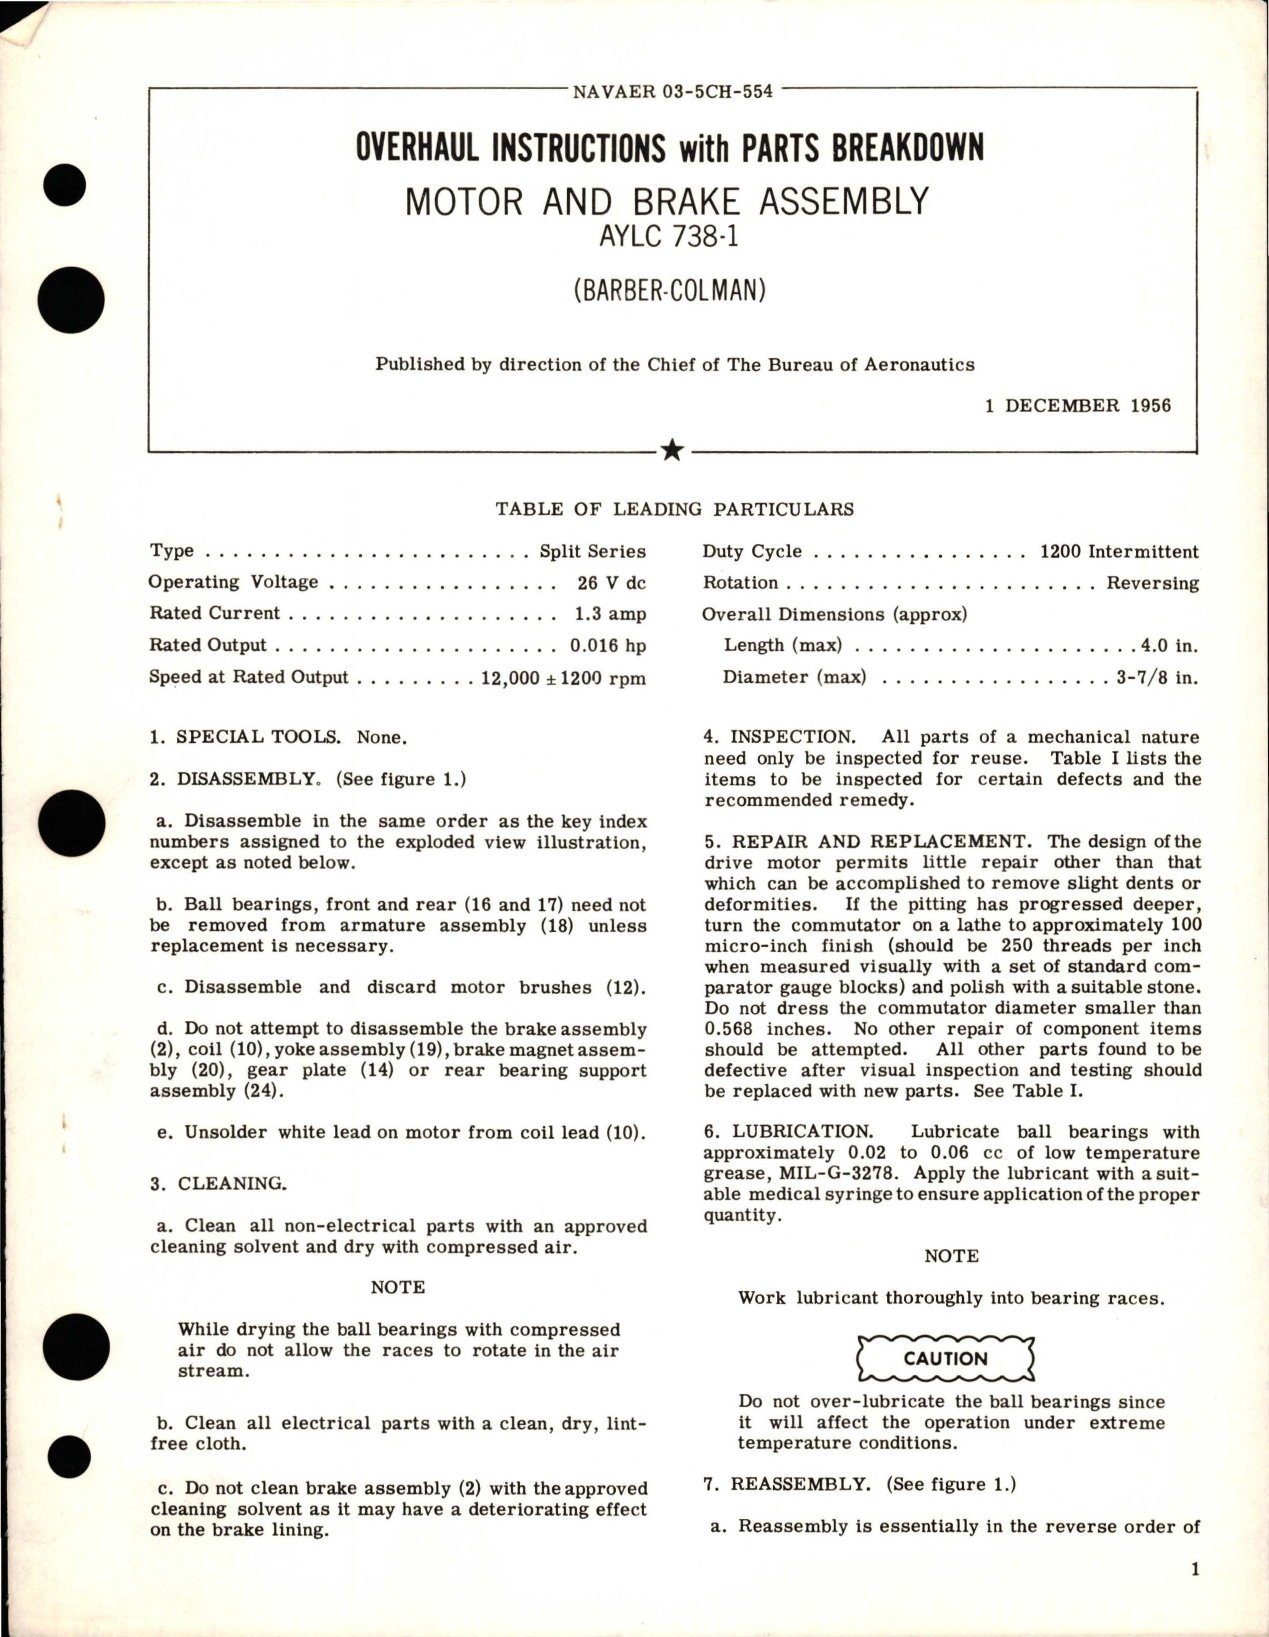 Sample page 1 from AirCorps Library document: Overhaul Instructions with Parts Breakdown for Motor and Brake Assembly - AYLC 738-1